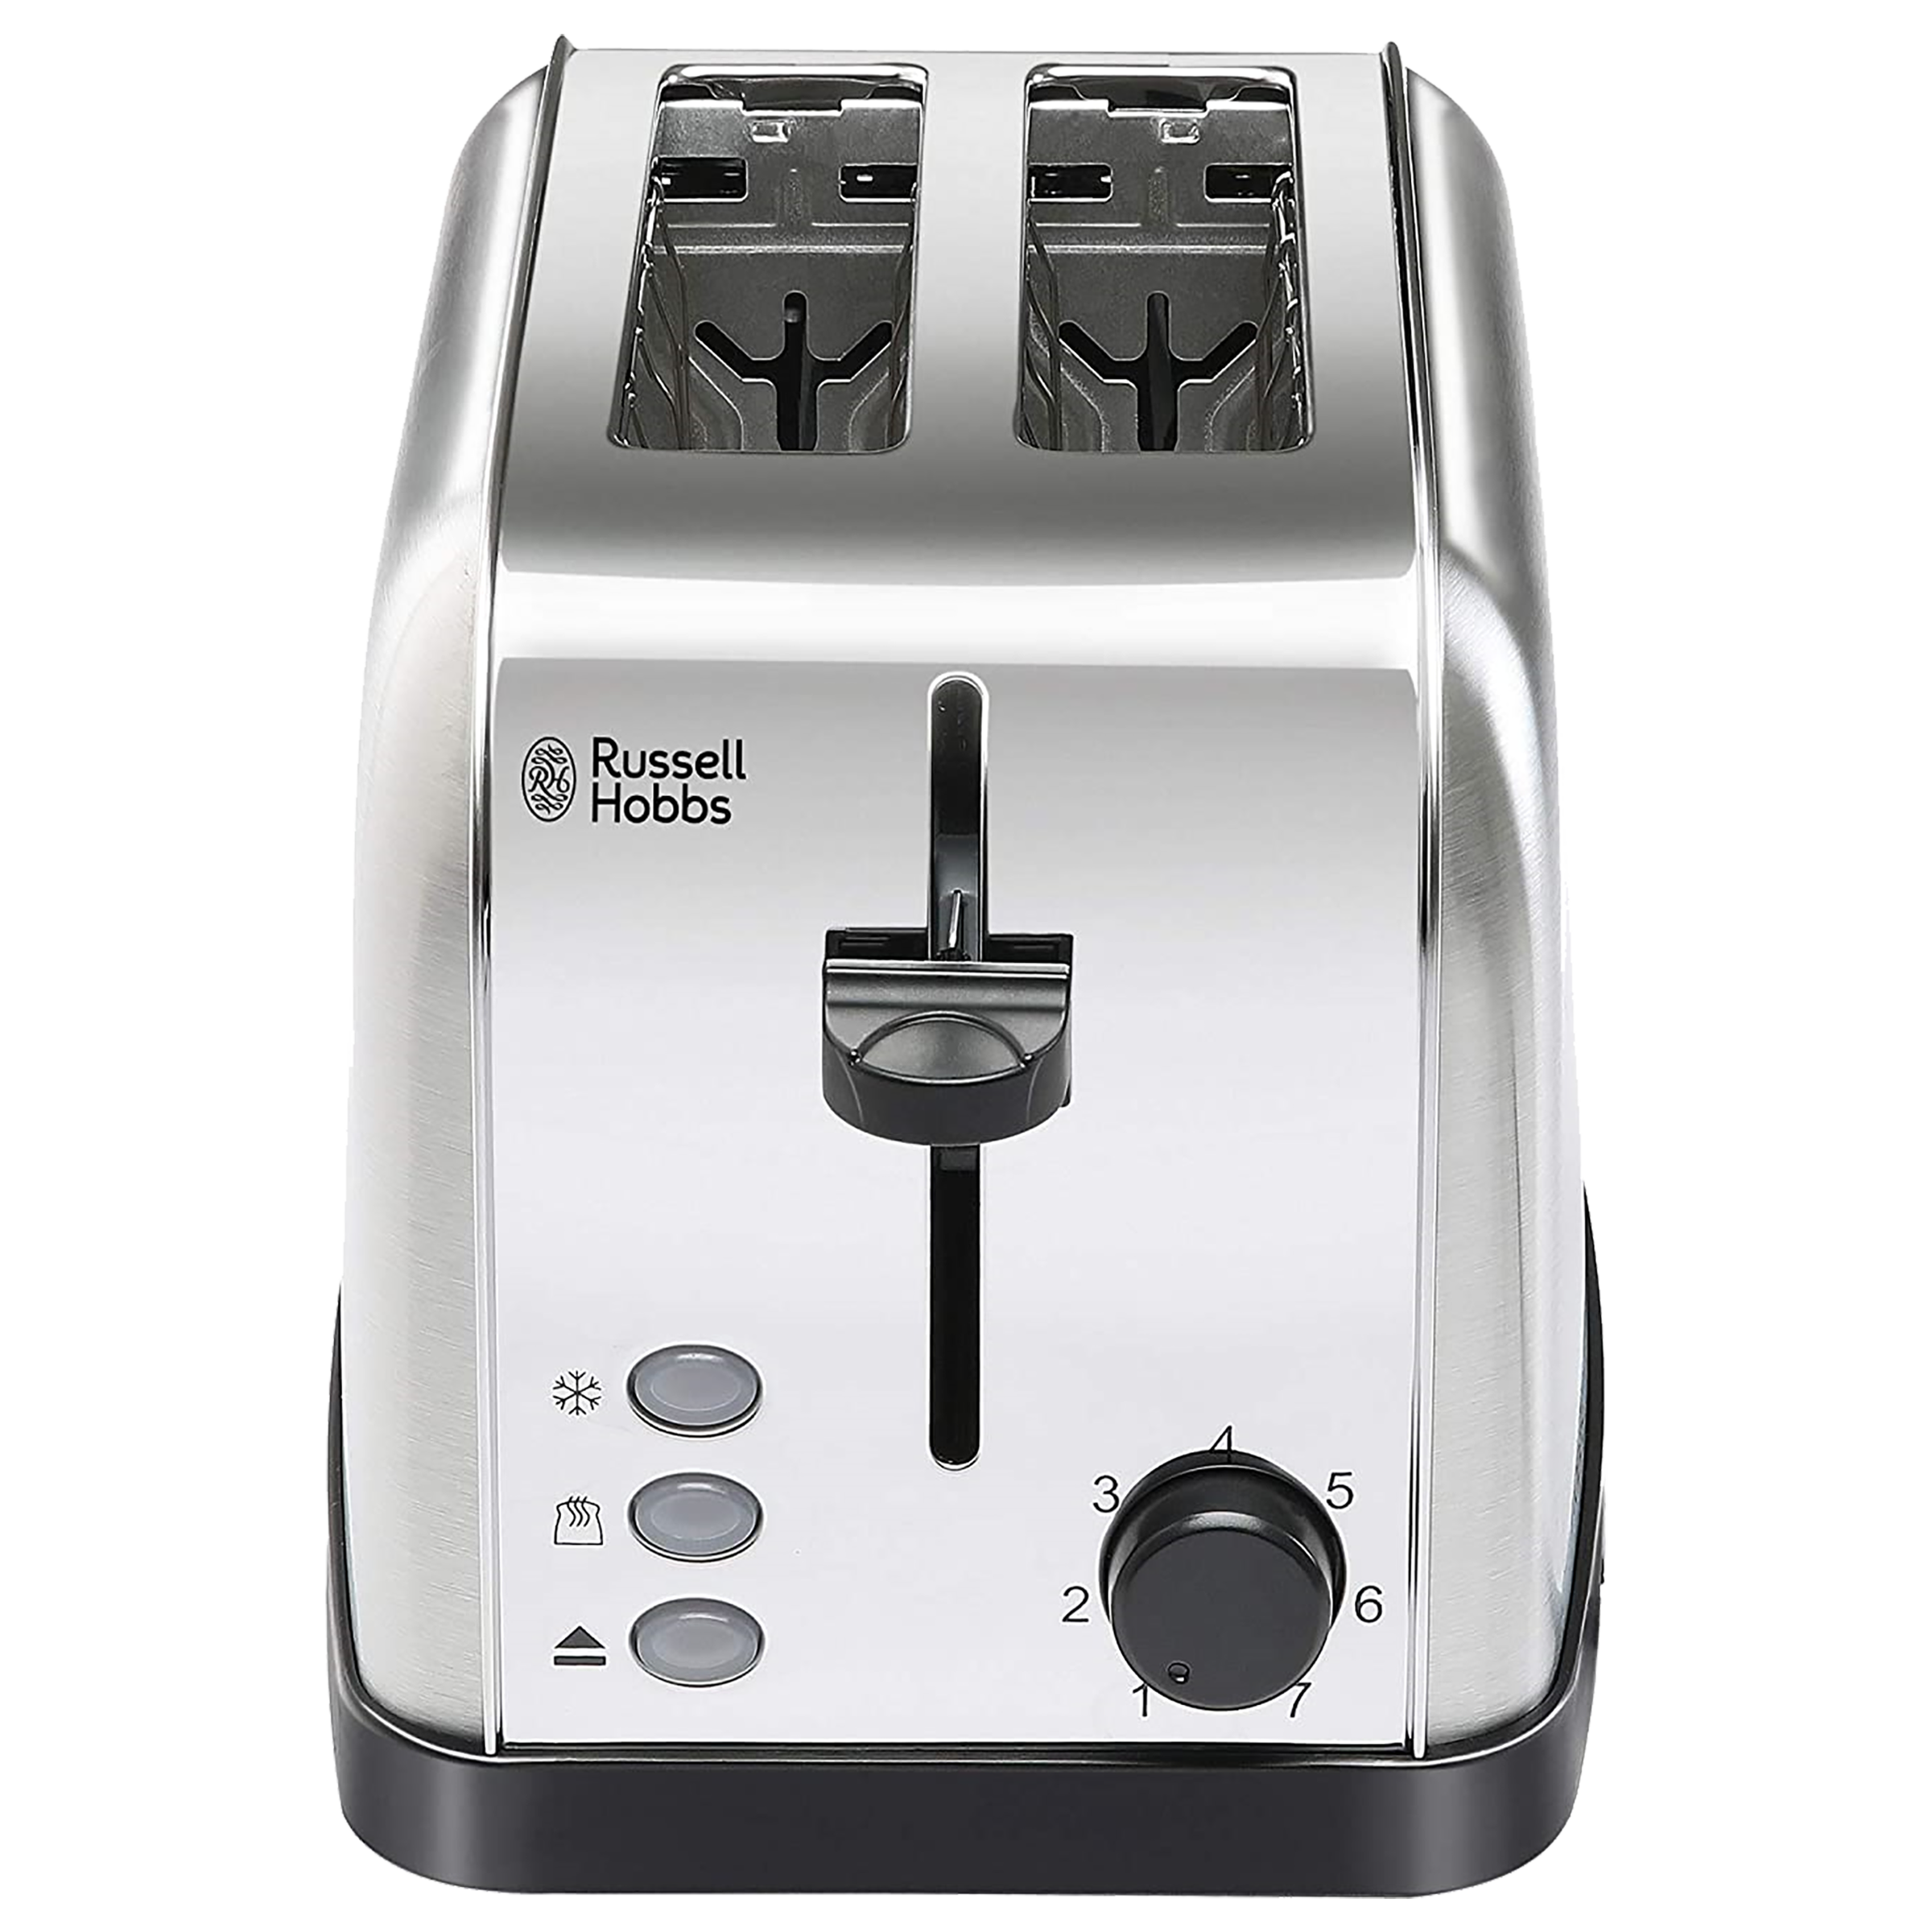 Russell Hobbs 18780 850 Watts 2 Slice Automatic Pop-Up Toaster (Variable Browning Control, Silver)